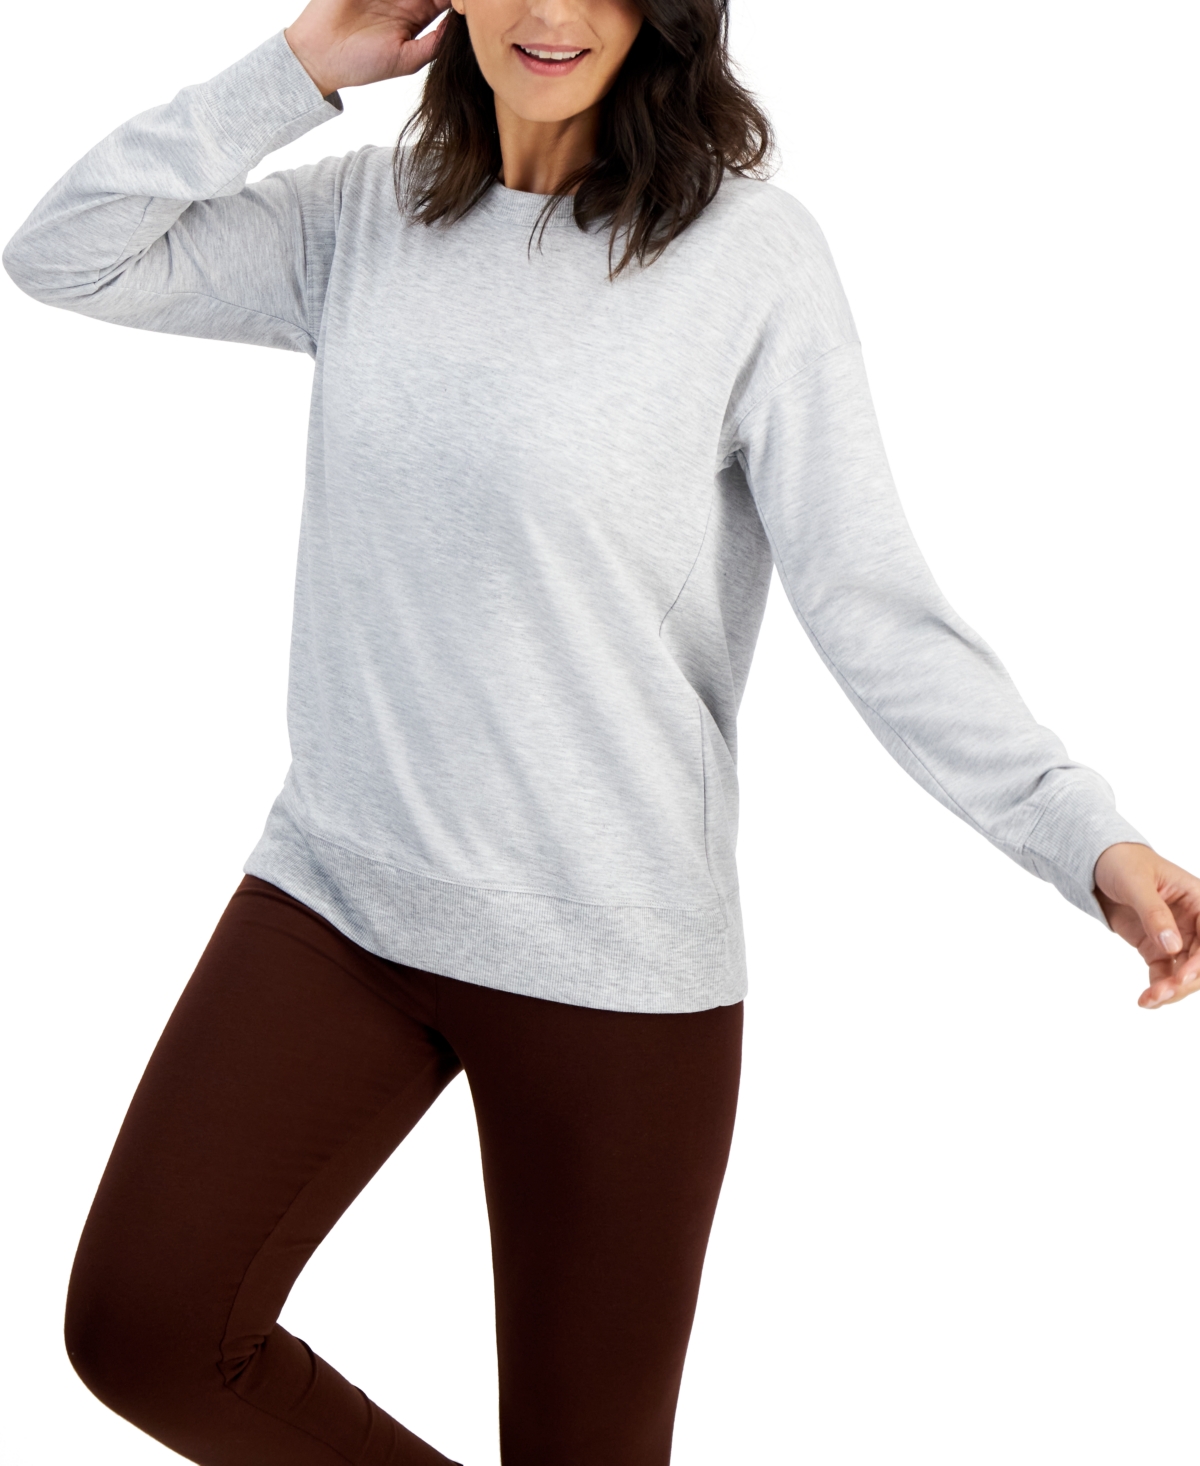 Women's Open-Back Long-Sleeve Pullover Top, Created for Macy's - Grey Whisper Heather